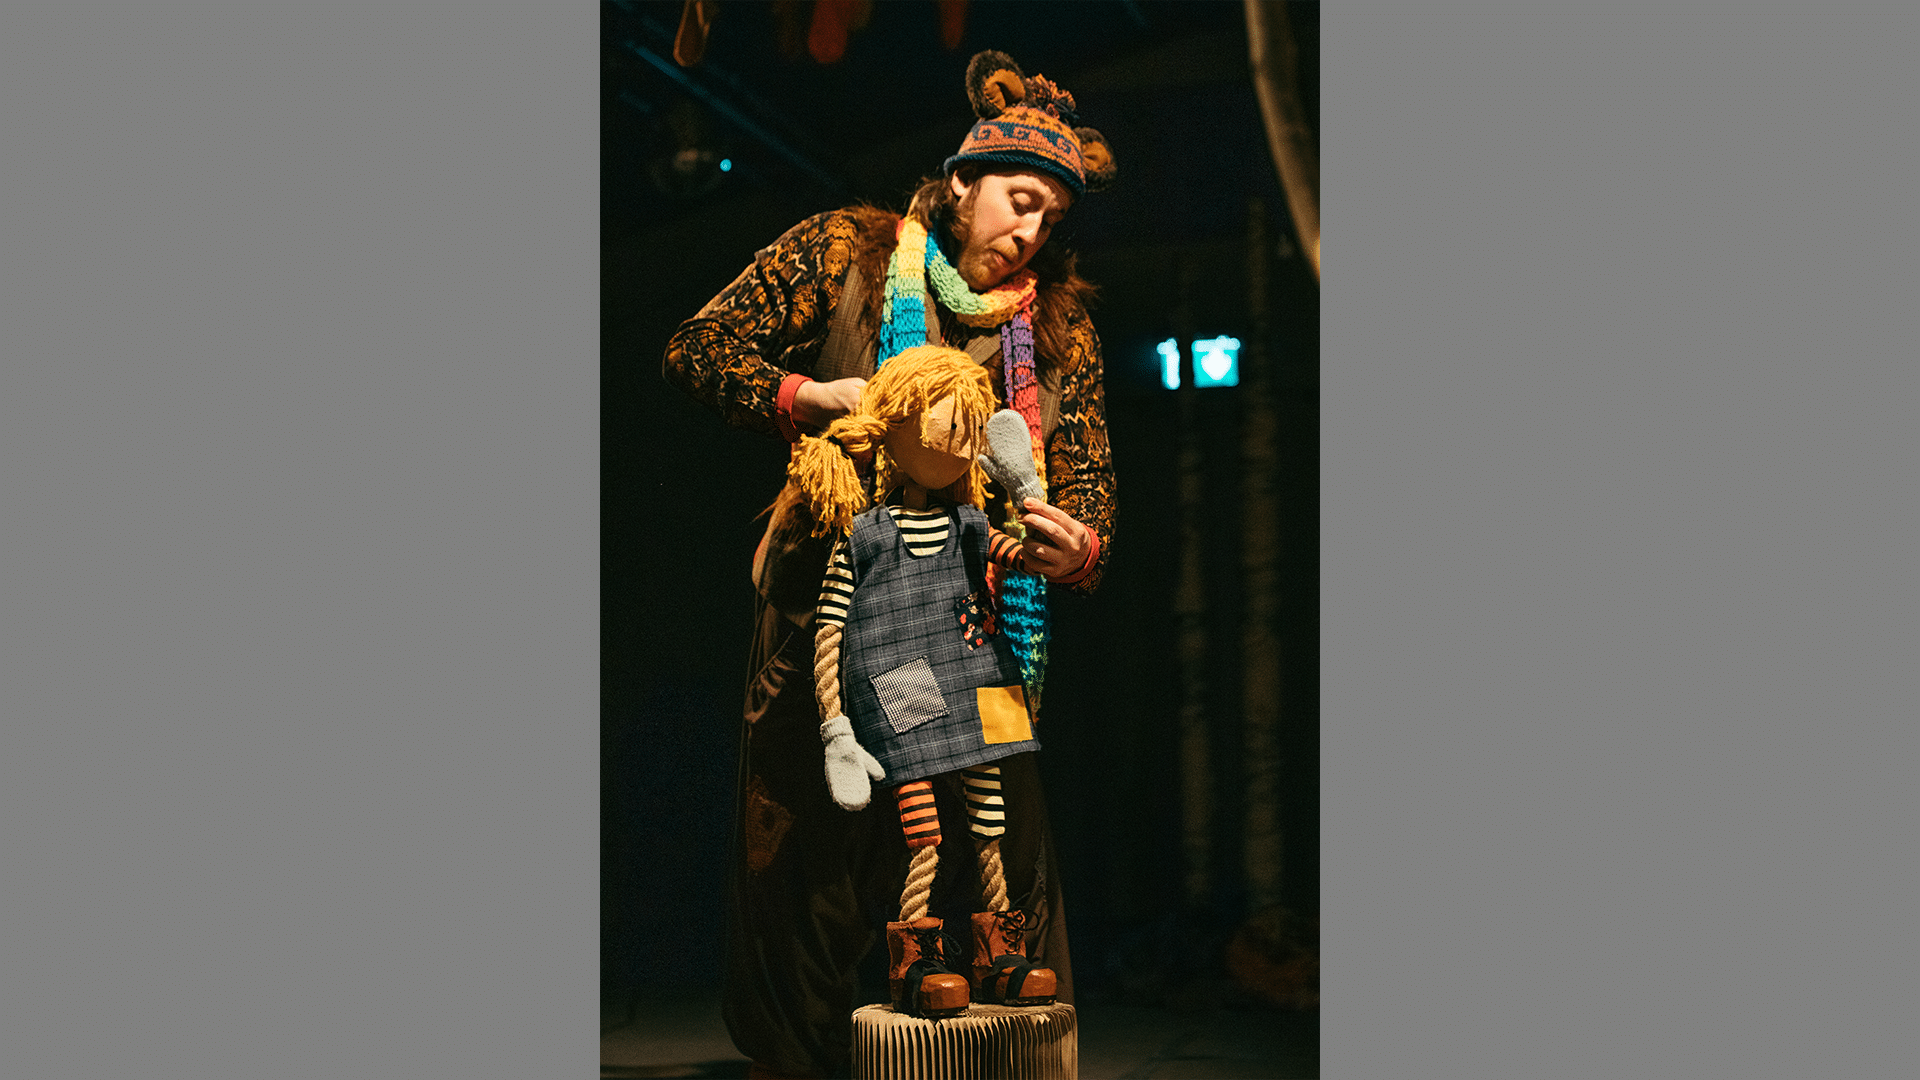 A performer stands on stage with a puppet of a young girl who has golden hair.